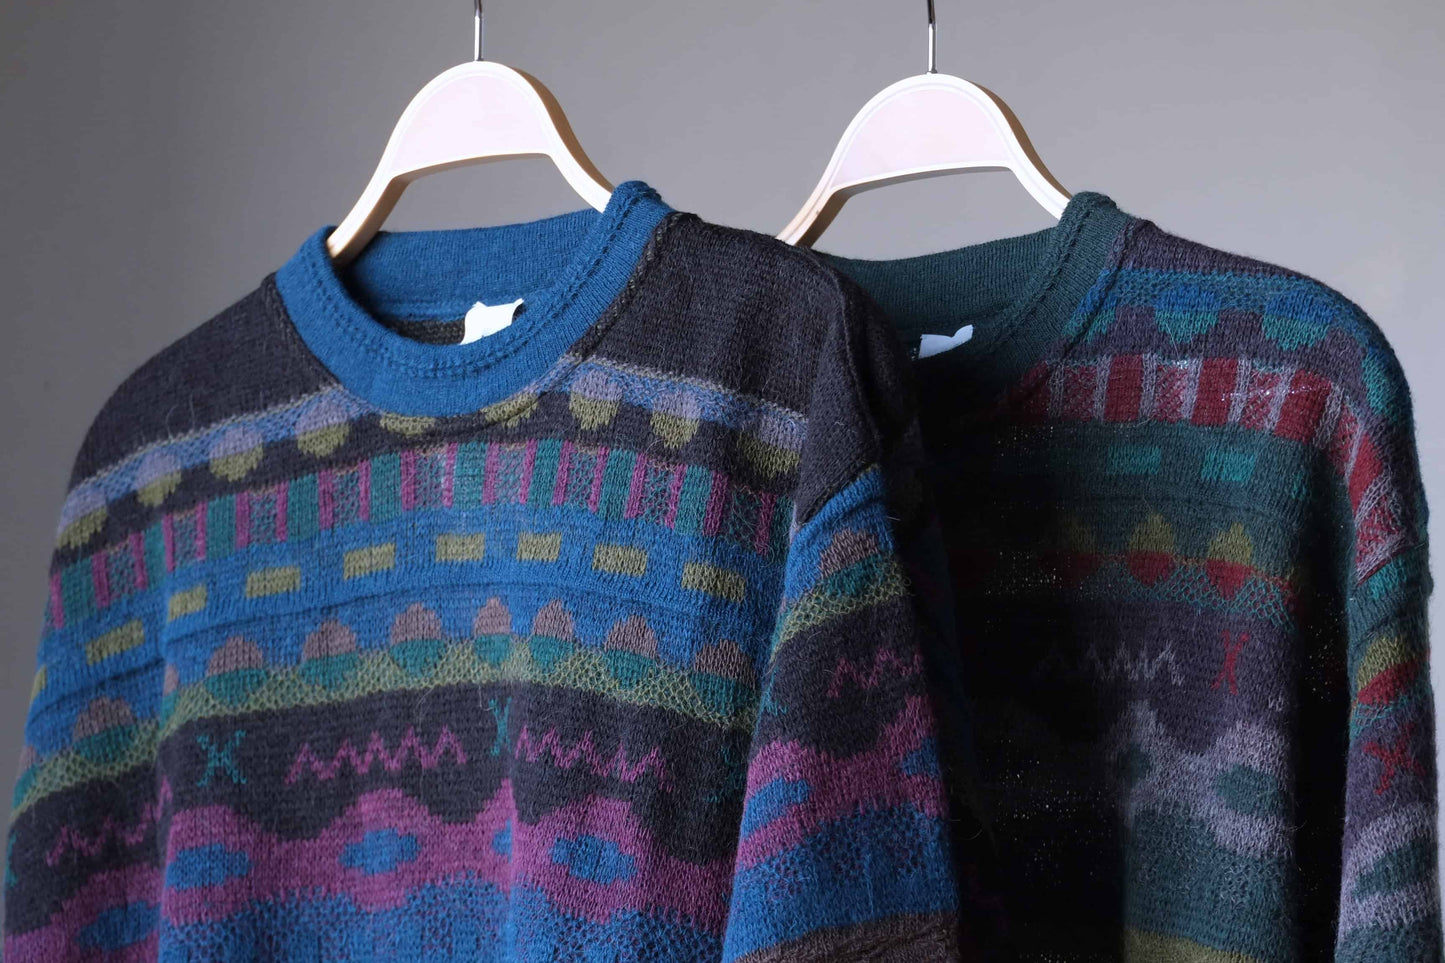 CAGI 90's Patterned Sweater